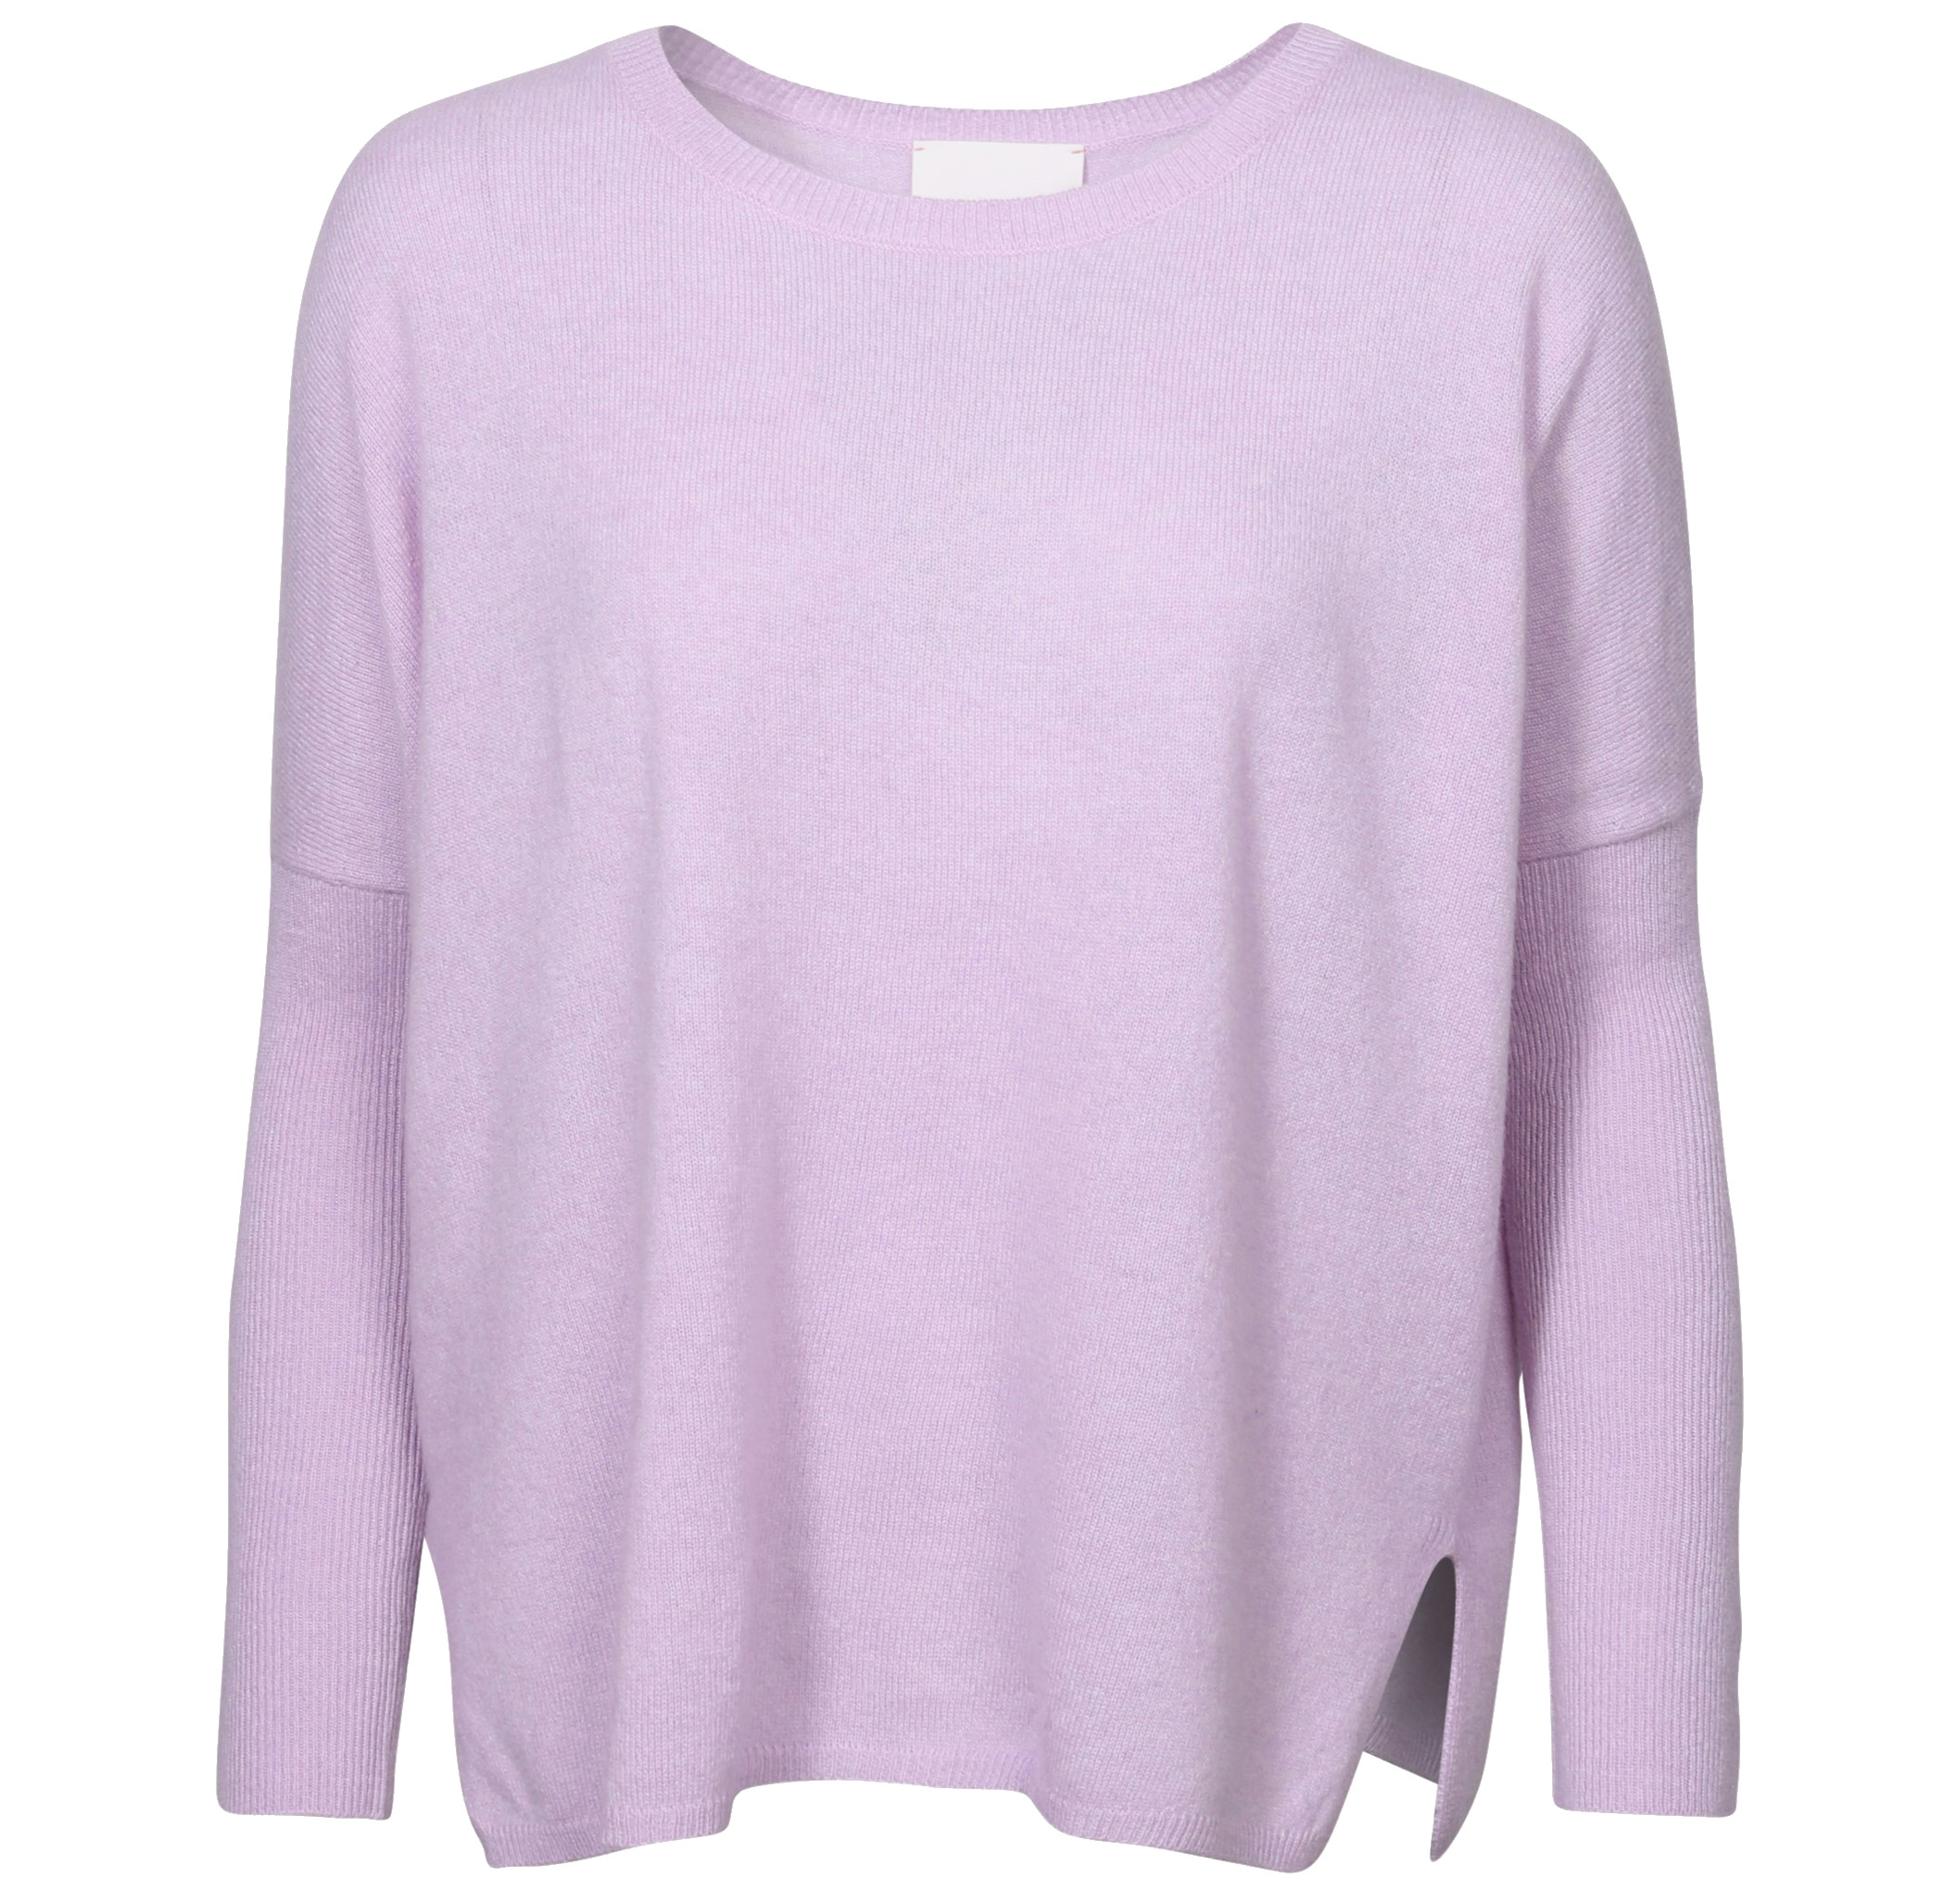 ABSOLUT CASHMERE Poncho Sweater Astrid in Light Lilac